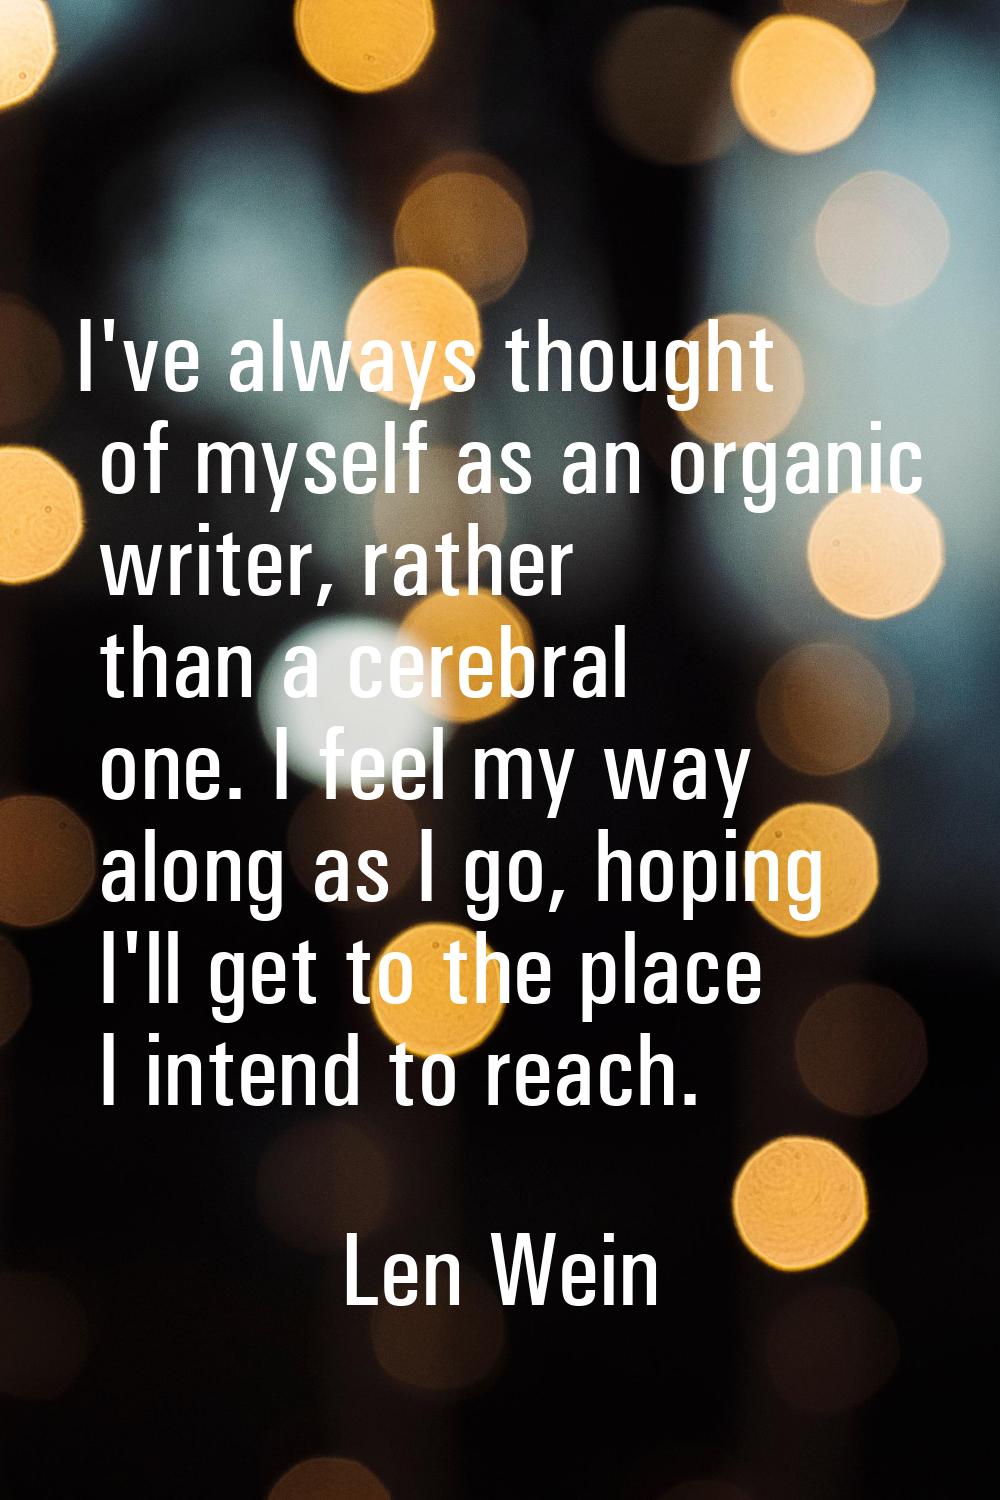 I've always thought of myself as an organic writer, rather than a cerebral one. I feel my way along